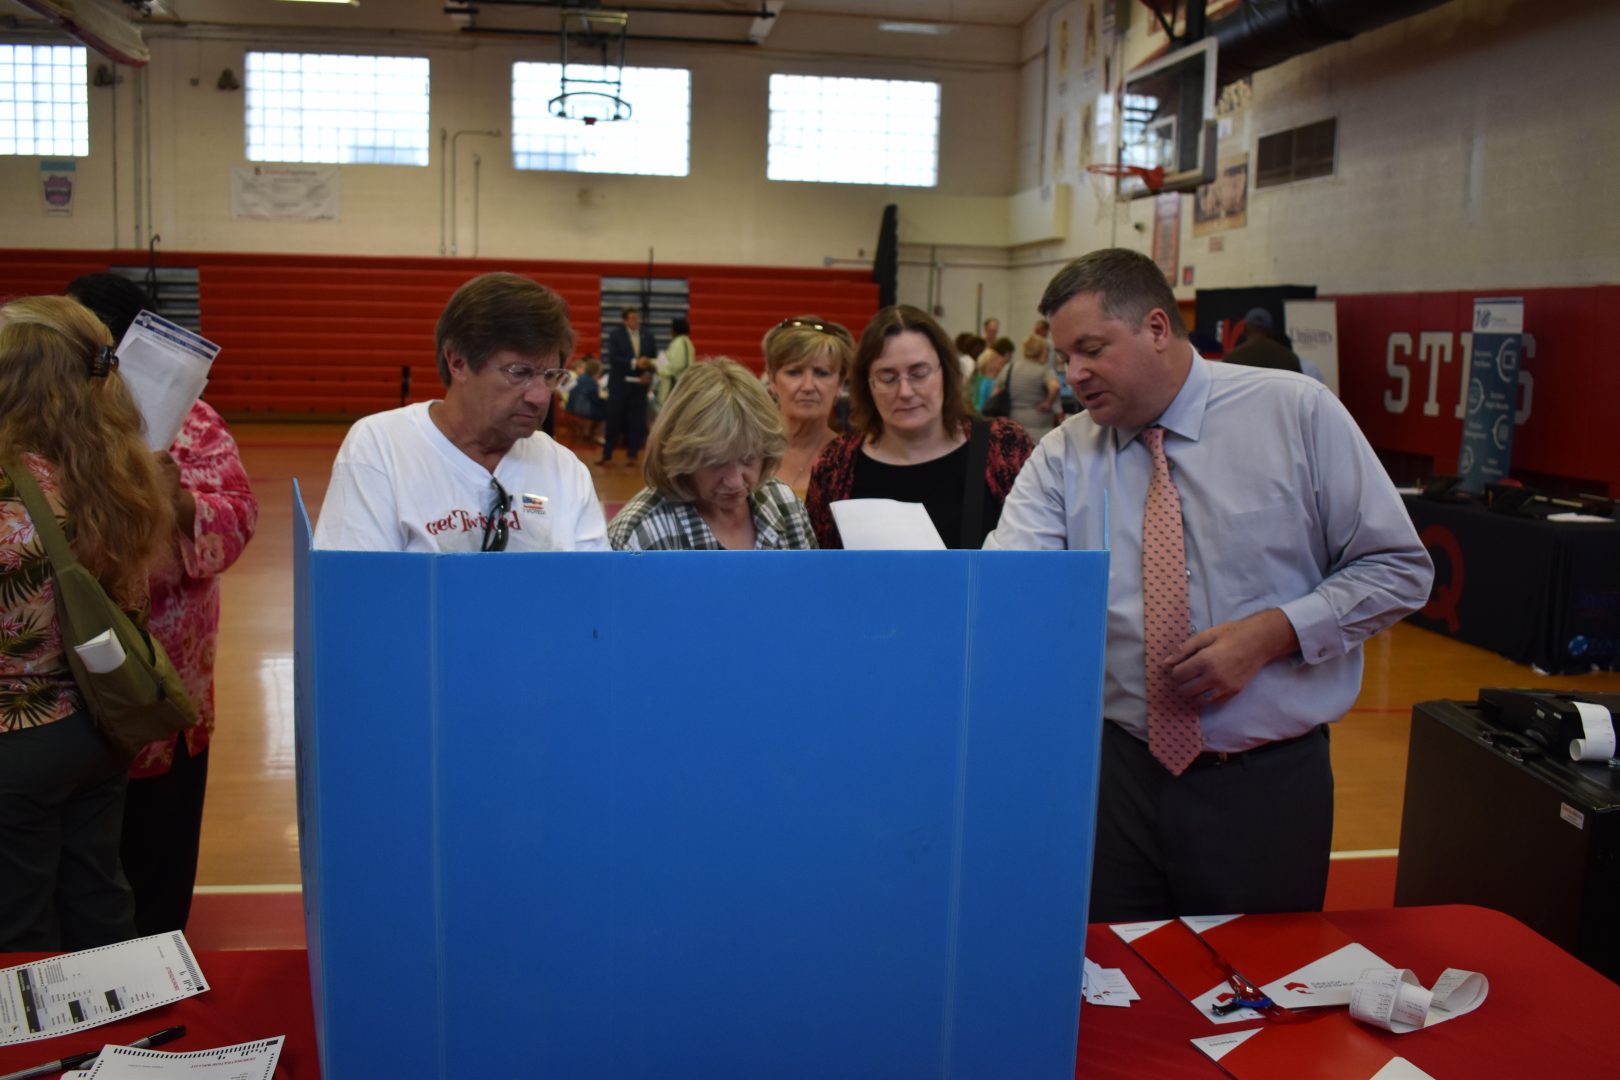 People look at one of the options for a new voting system during a demonstration at Susquehanna Township High School in Dauphin County on June 11, 2019.